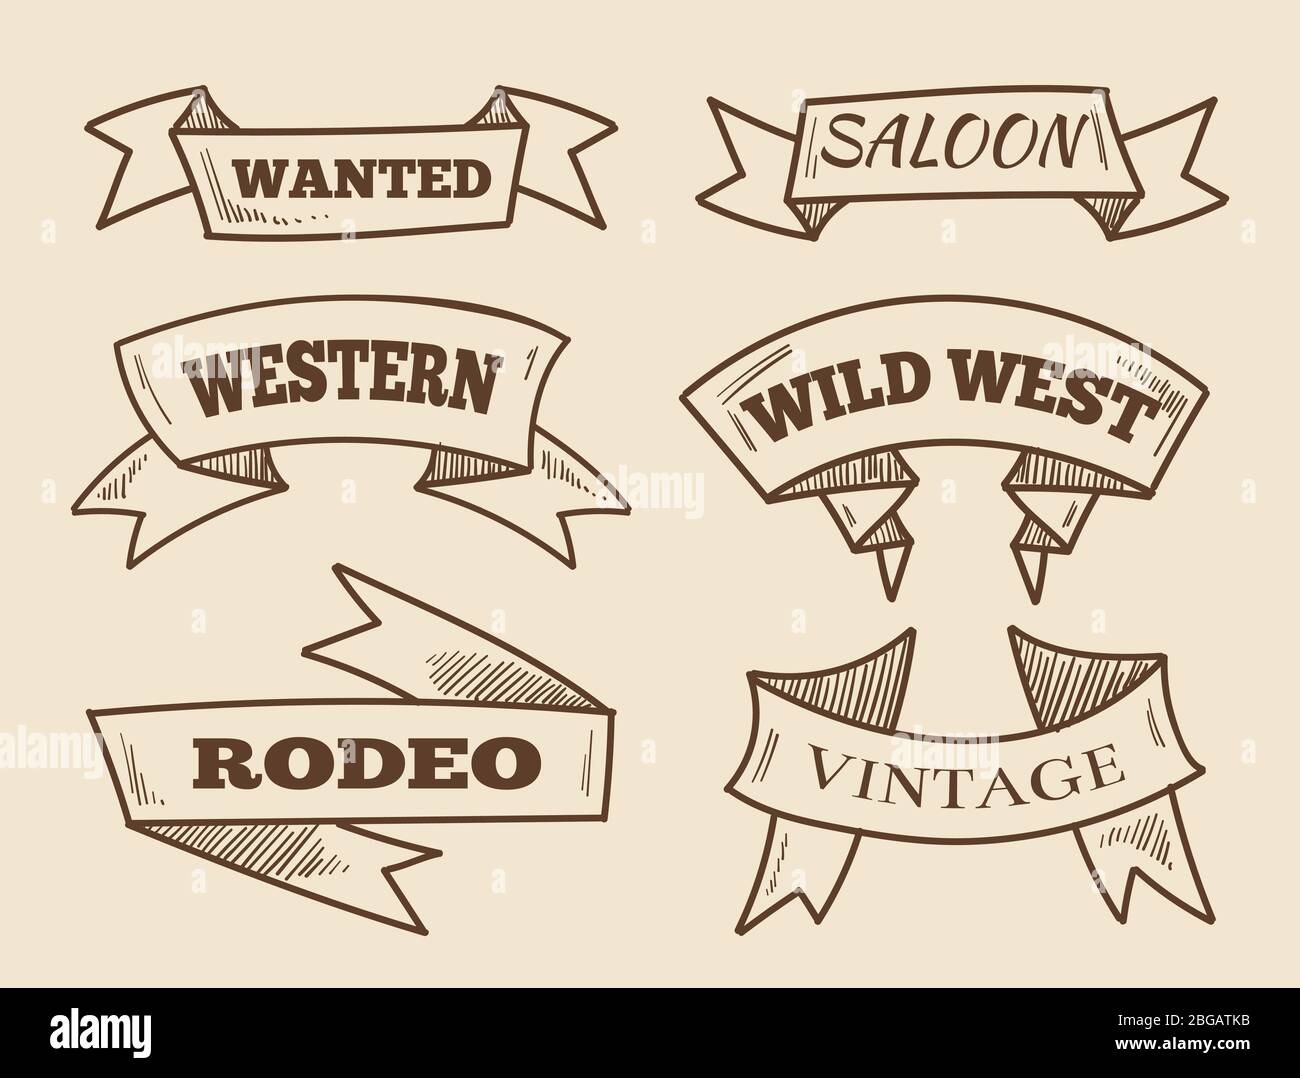 Hand drawn western ribbons. Vintage design elements Stock Vector